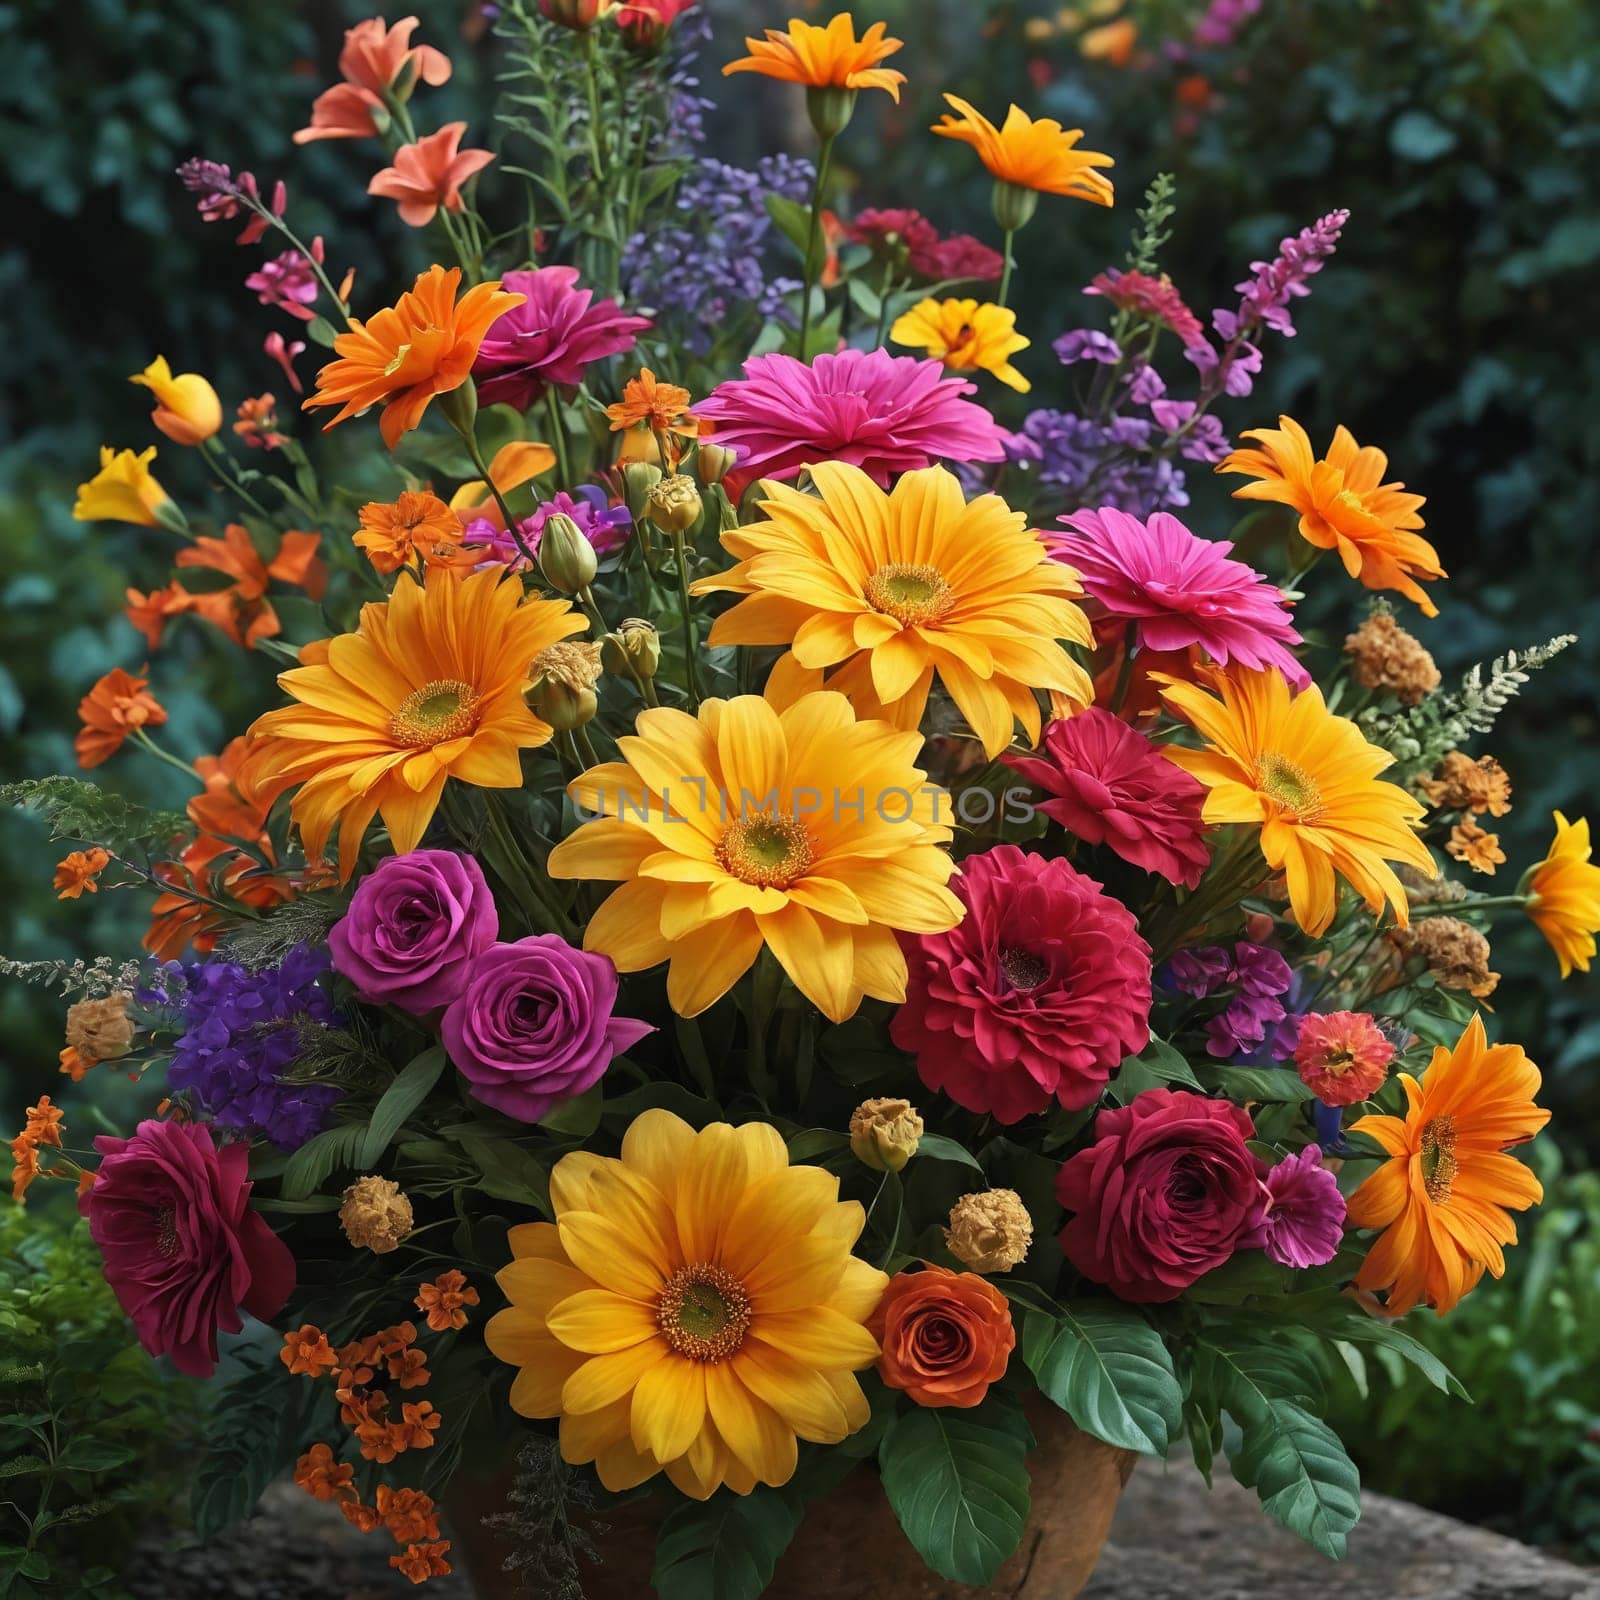 Add color to your day with a beautifully arranged bouquet of sunny sunflowers and soothing lavender.